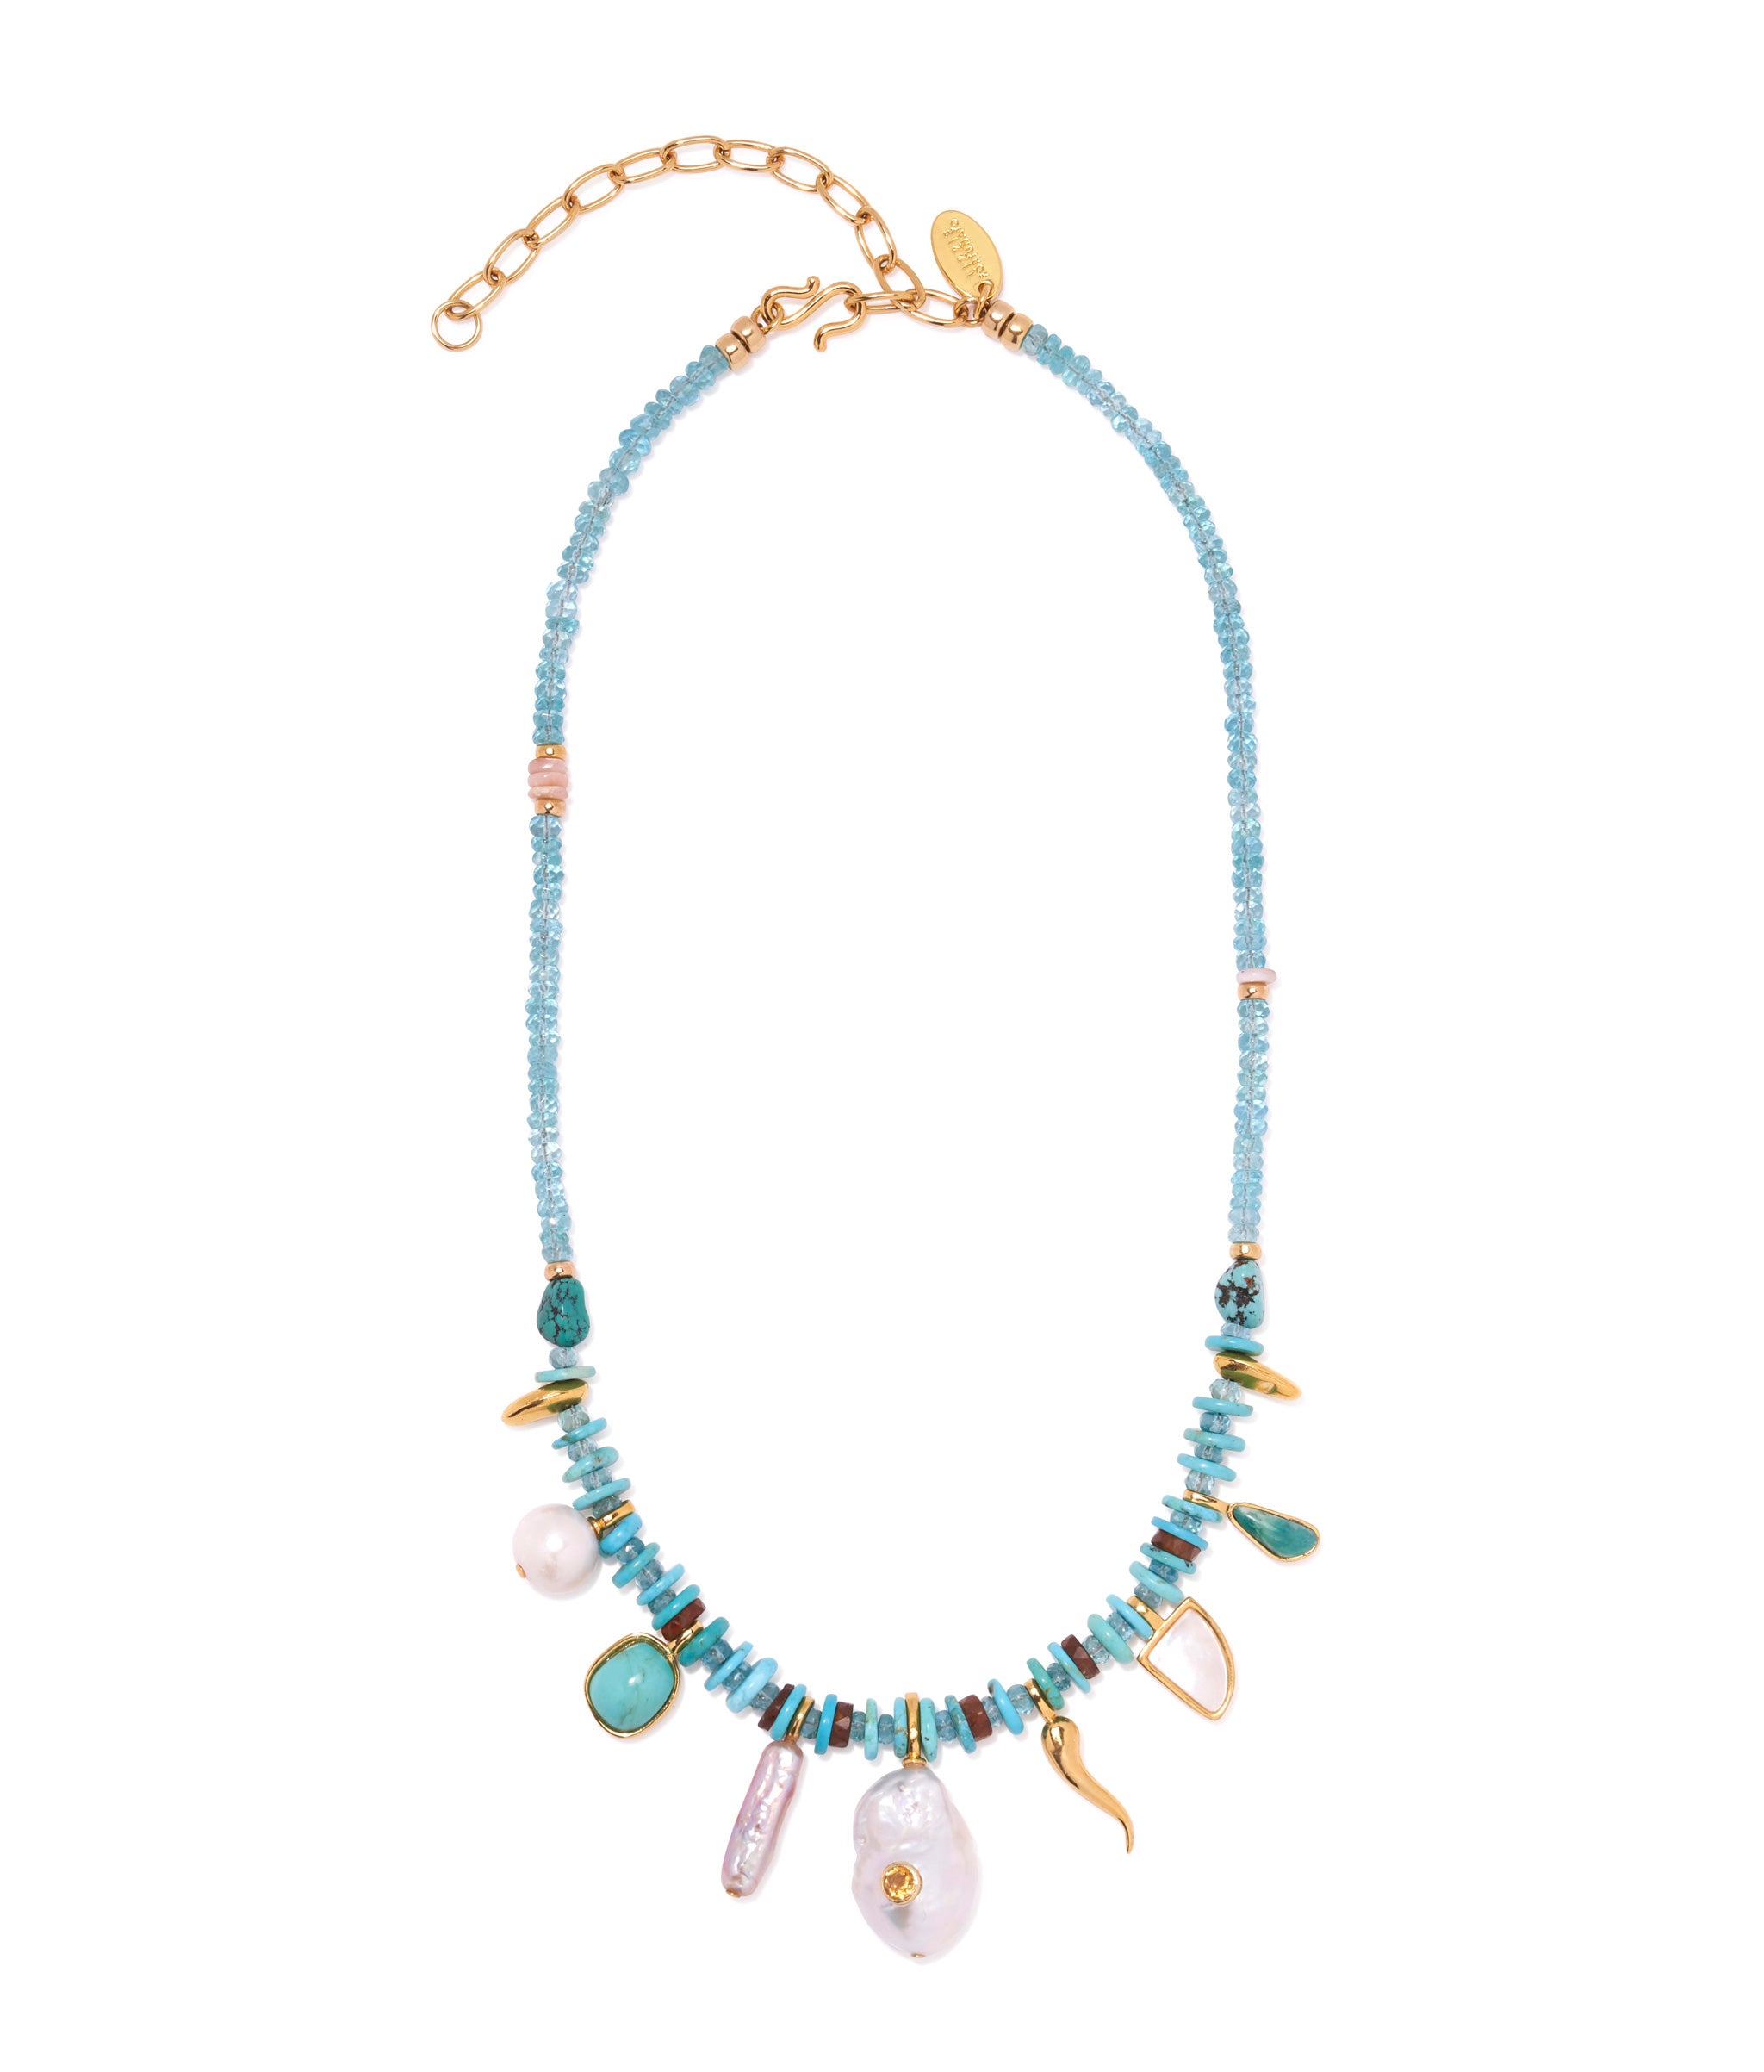 Nazar Necklace. Apatite and turquoise beads, pink opal and hessonite garnet accents.